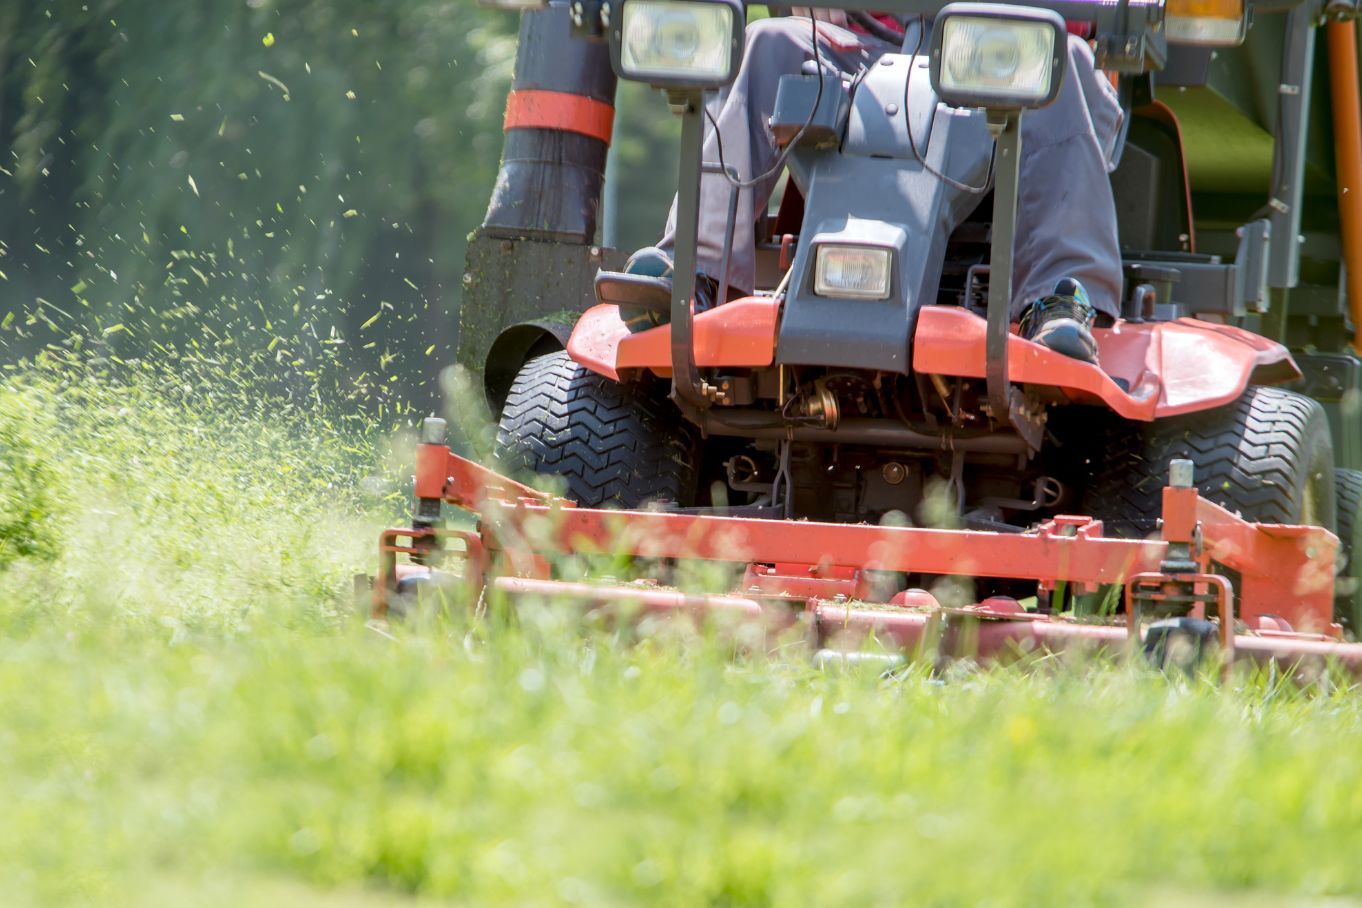 How to choose a reel mower